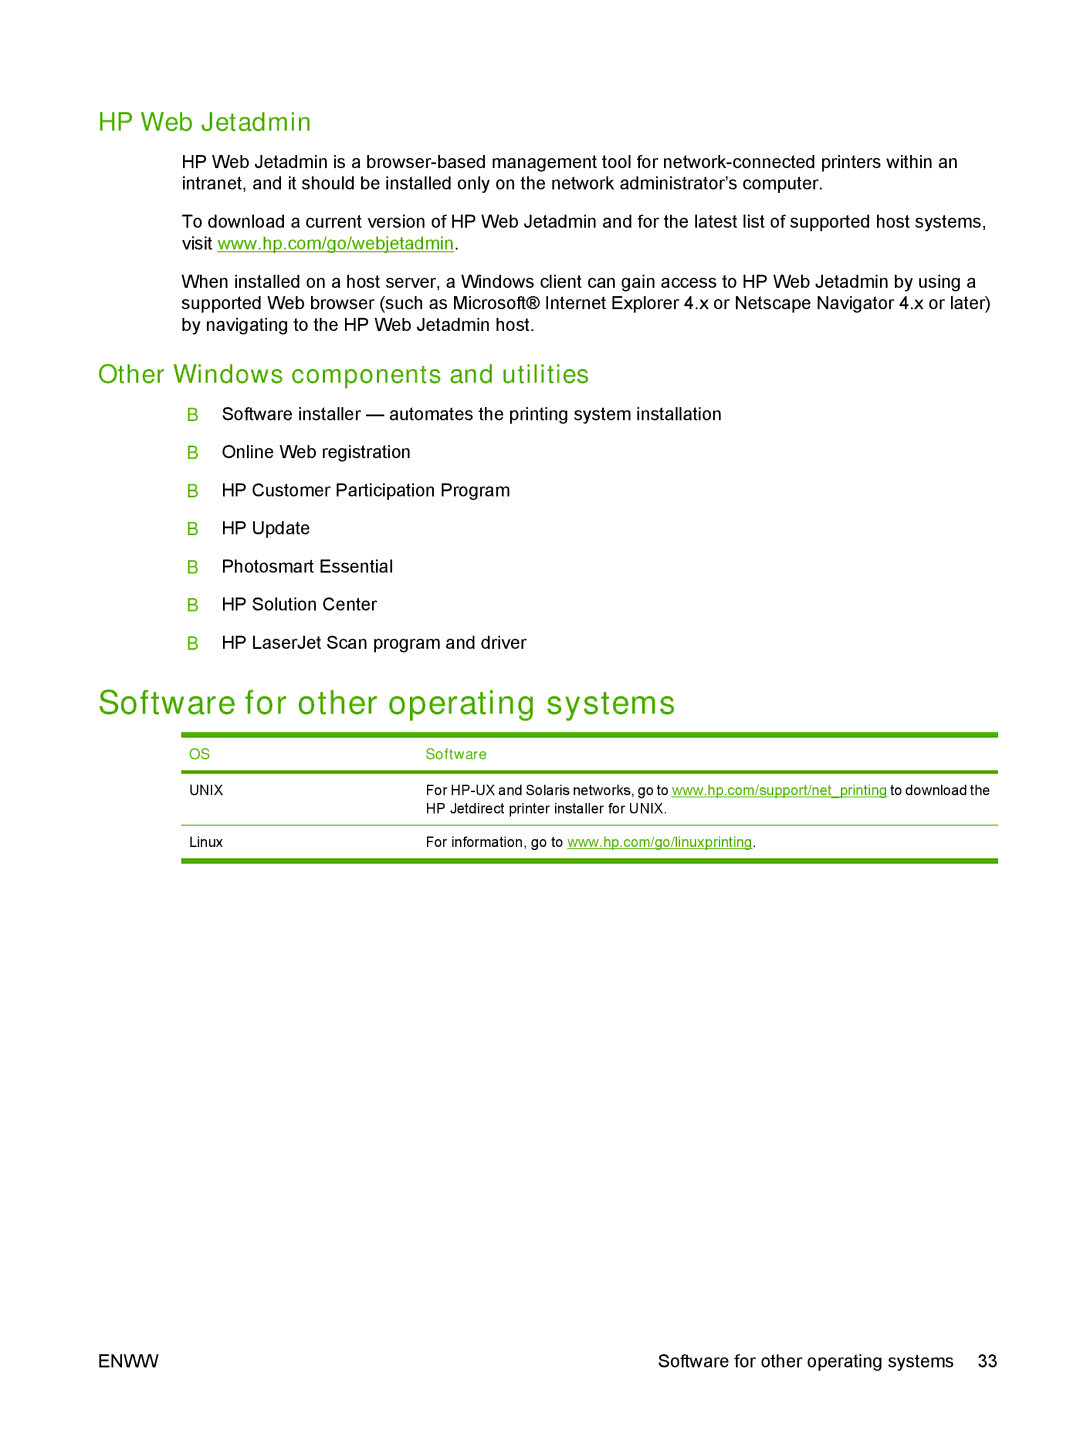 HP CM2320 manual Software for other operating systems, HP Web Jetadmin, Other Windows components and utilities 